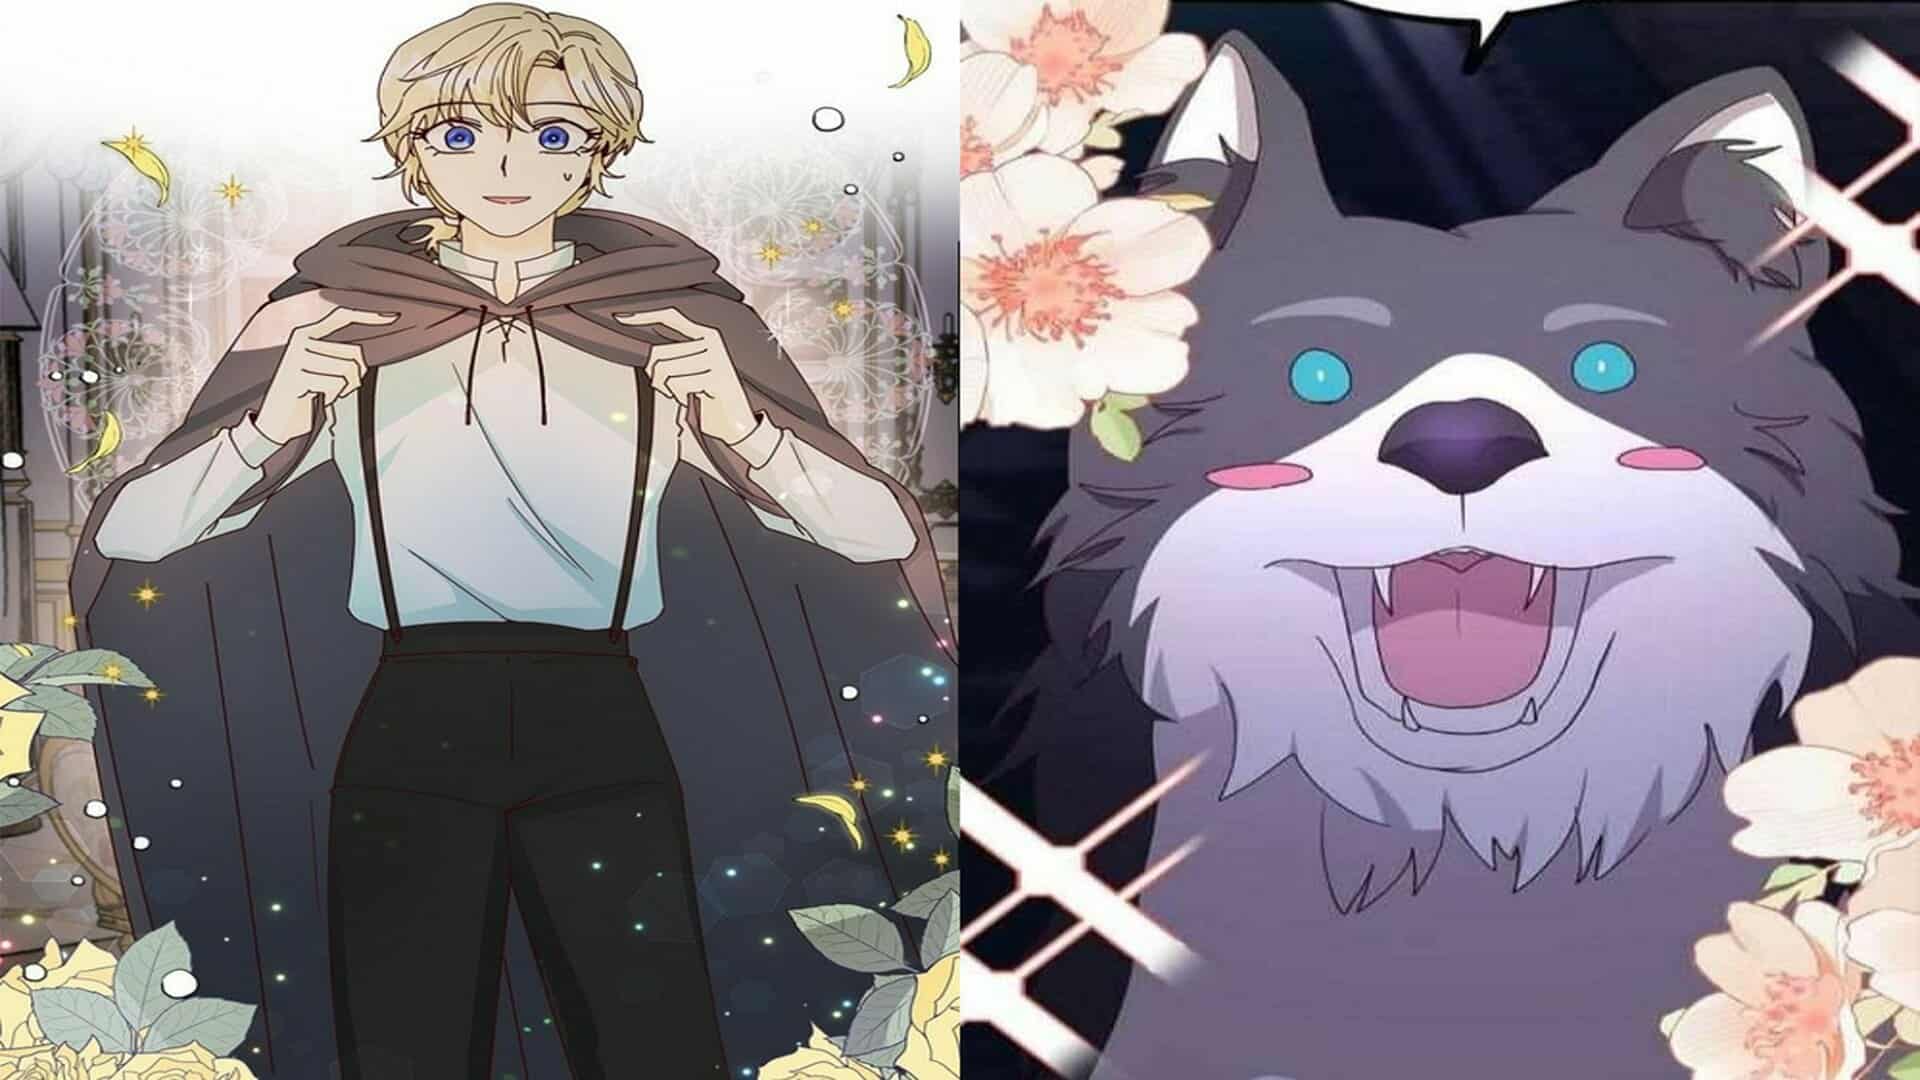 Lillian After Donning The Blonde Wig (Left) And Her Dog Wolfie (Right) - The Secret Life Of A Certain Count’s Lady Chapter 53